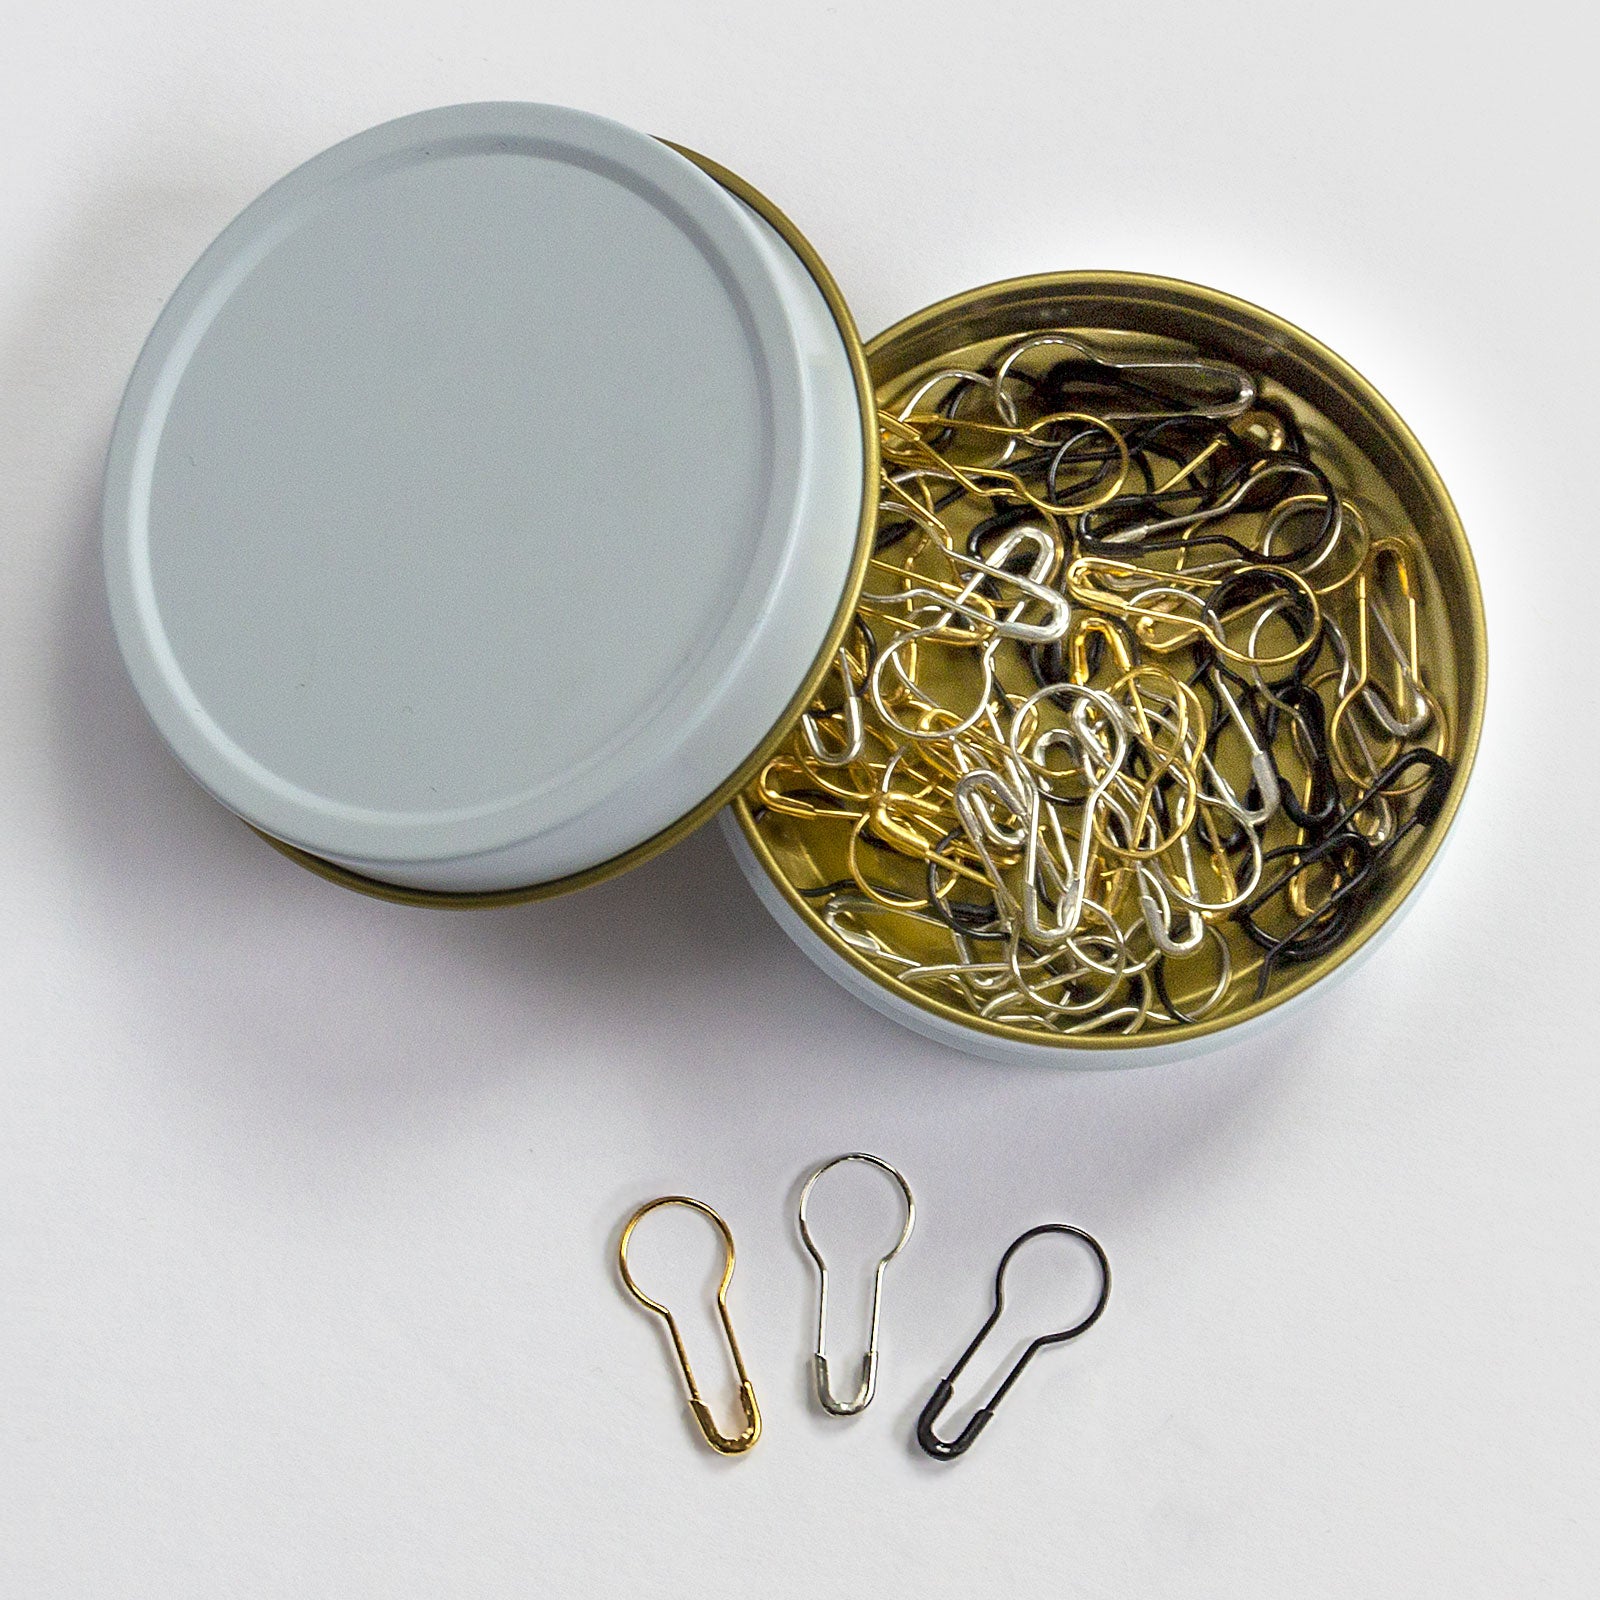 removable pear-shaped metal stitch marker set in a white and gold storage case